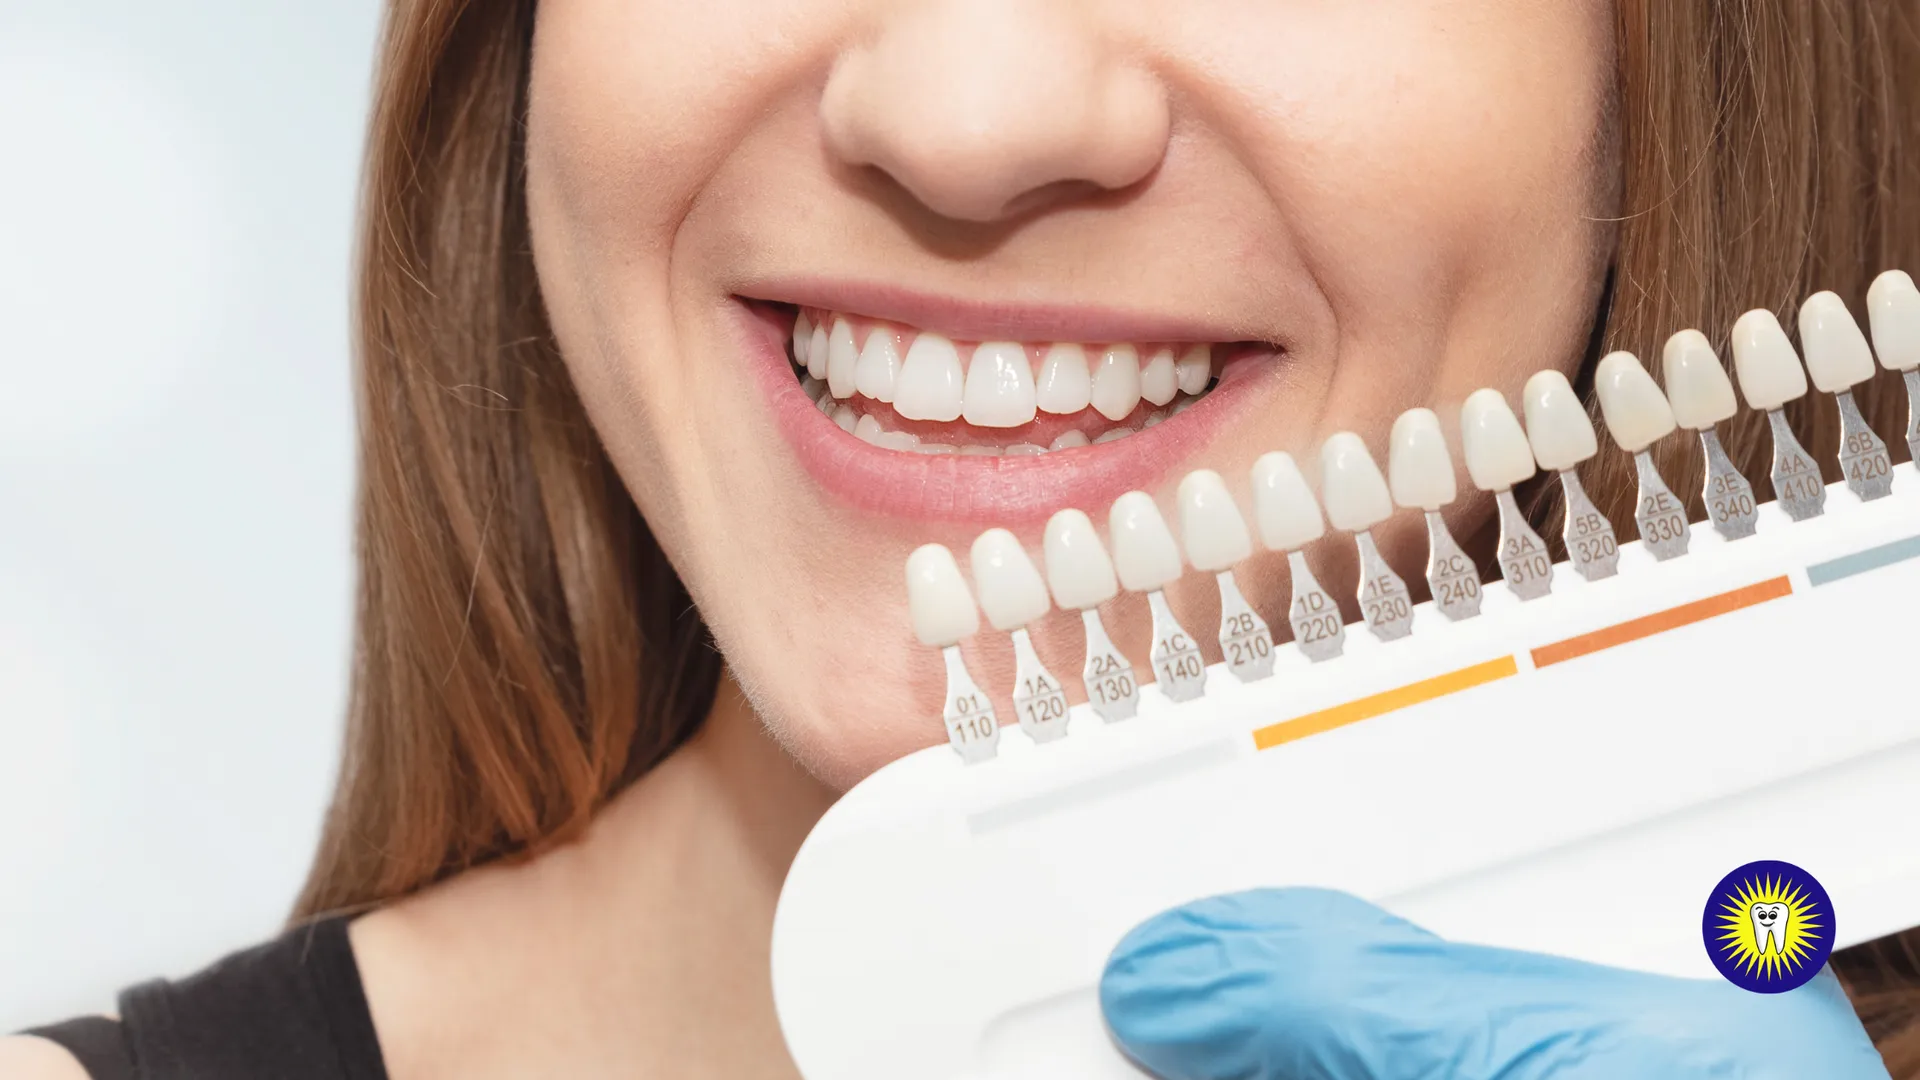 Professional teeth whitening services in Toronto and Scarborough